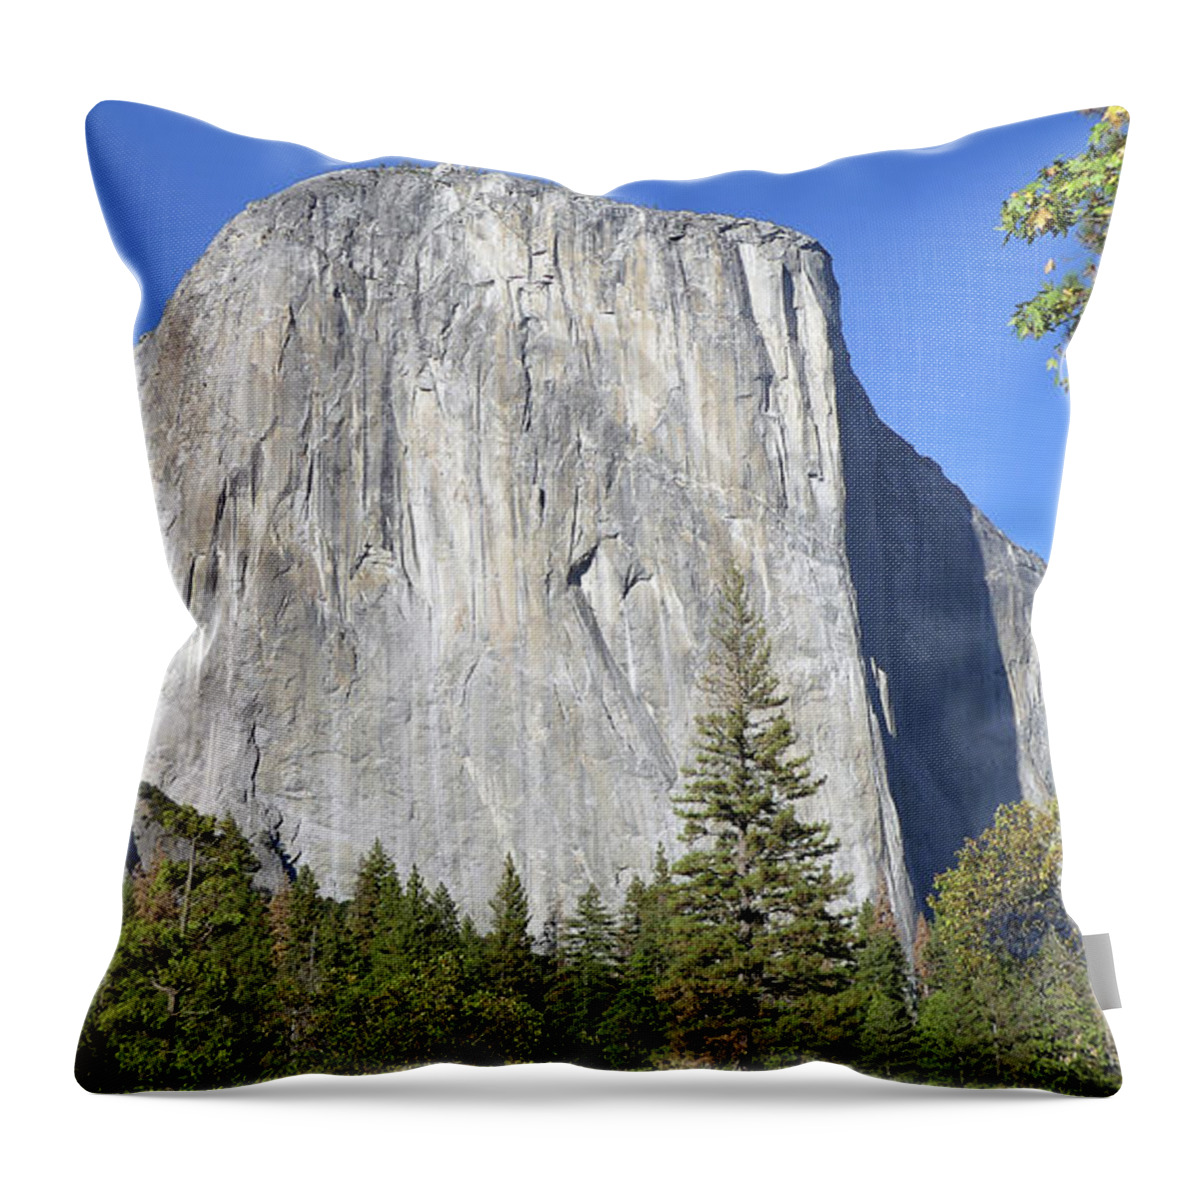 Usa Throw Pillow featuring the pyrography El Capitan by Magnus Haellquist